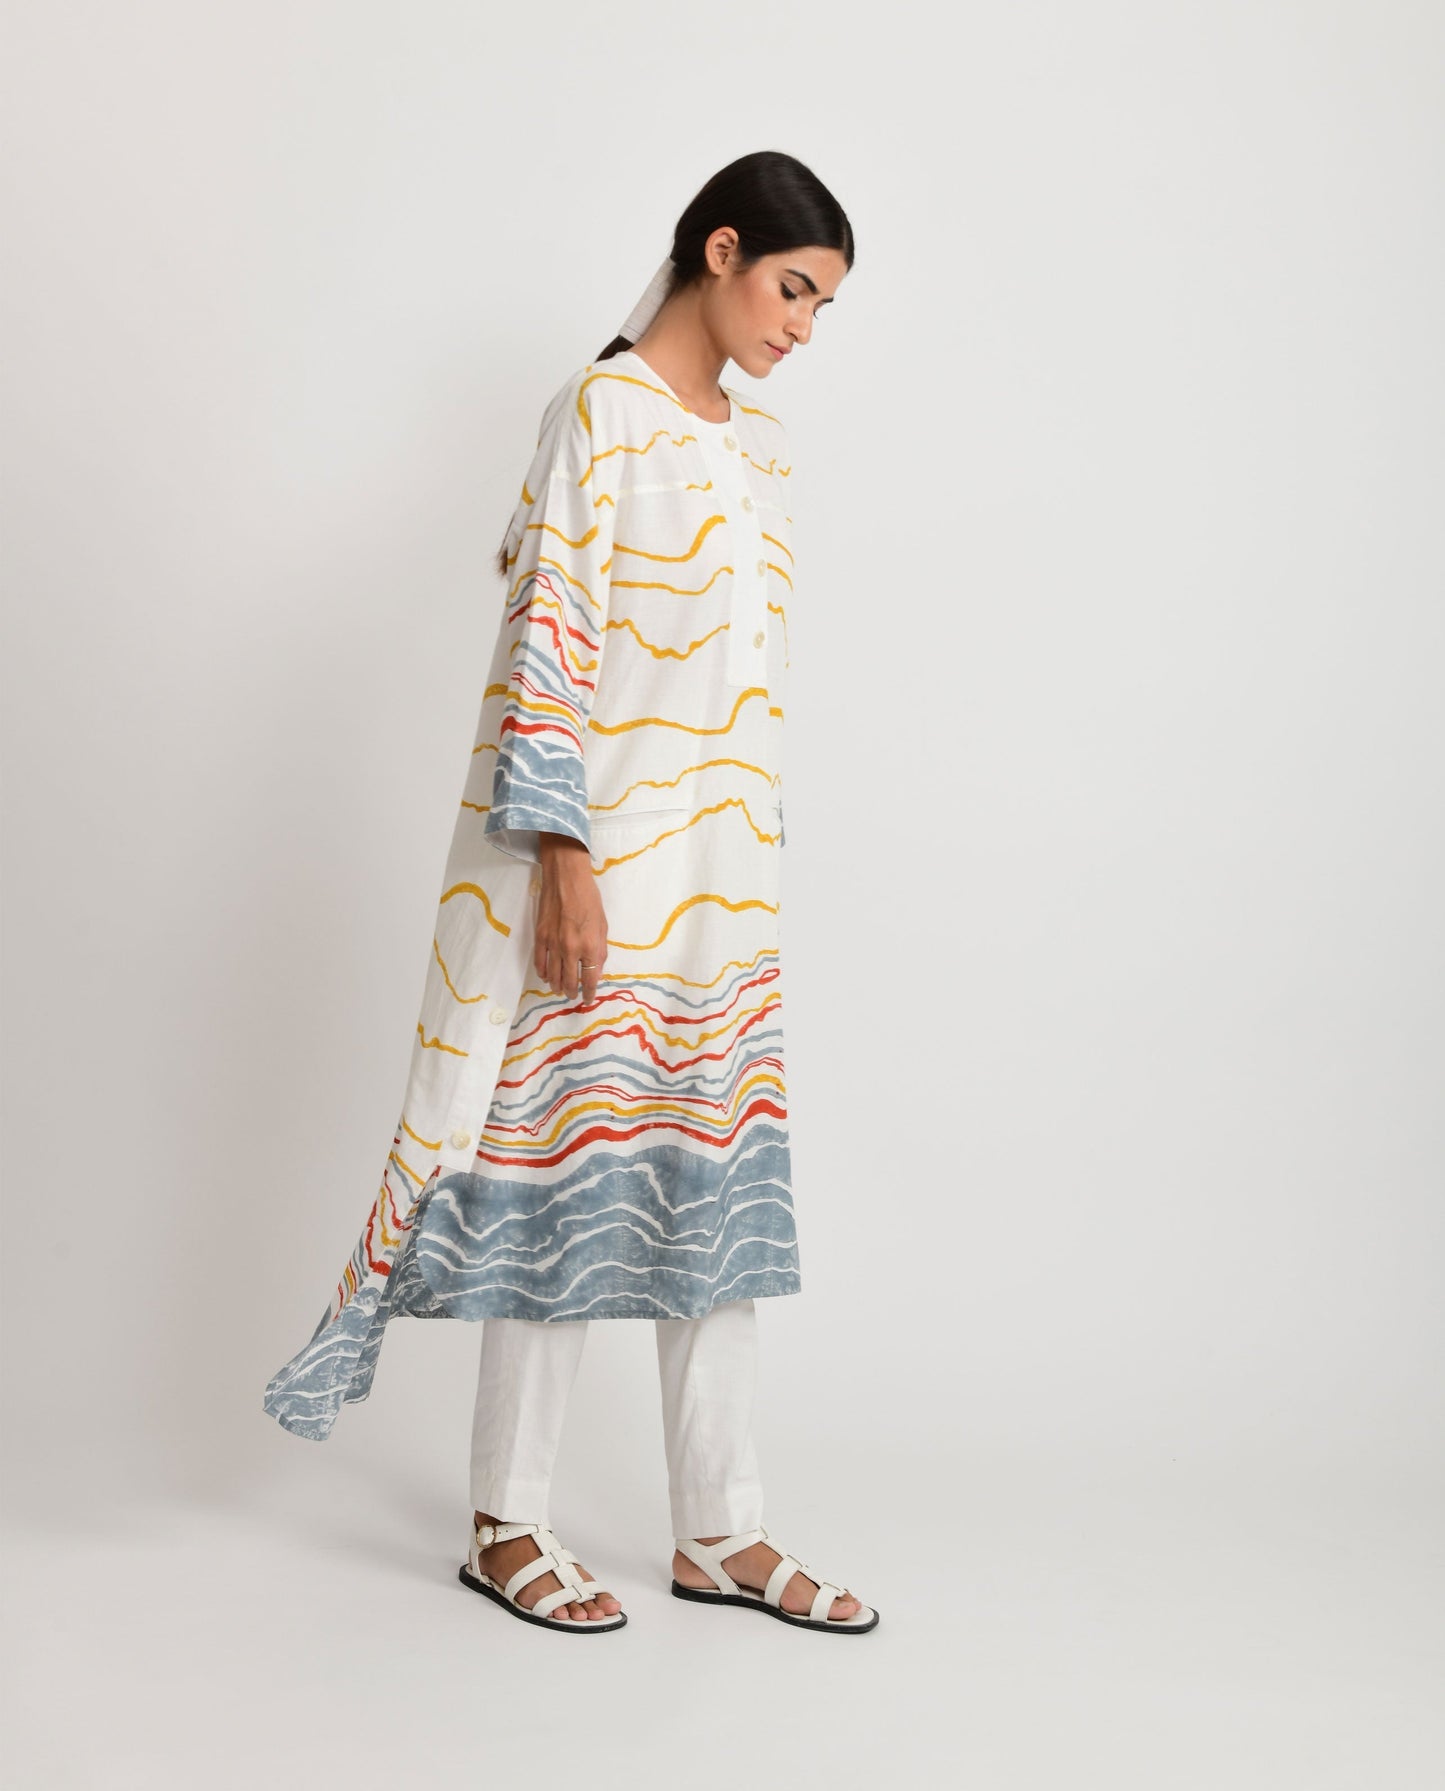 Azo Free Dye Block Printed Co-ord Set by Rias Jaipur with Azo Free Dye, Bamboo, Block Prints, Casual Wear, Co-ord Sets, Cotton, Parat, Parat by Rias Jaipur, Regular Fit, Travel Co-ords, White, Womenswear at Kamakhyaa for sustainable fashion